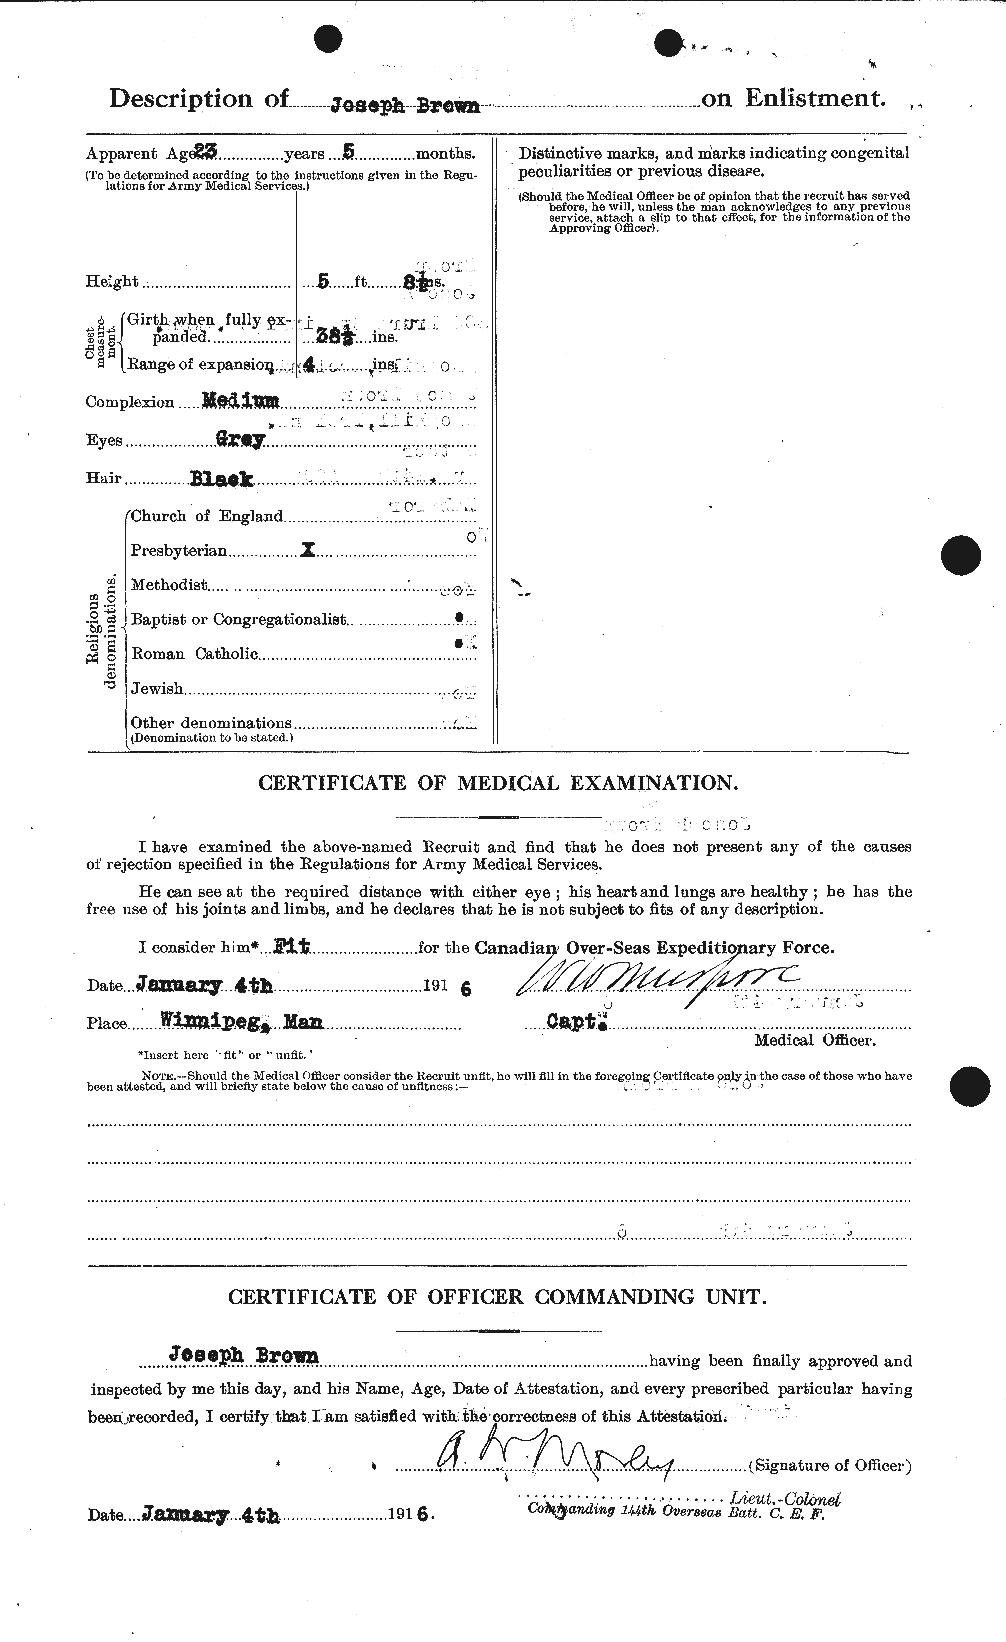 Personnel Records of the First World War - CEF 265927b